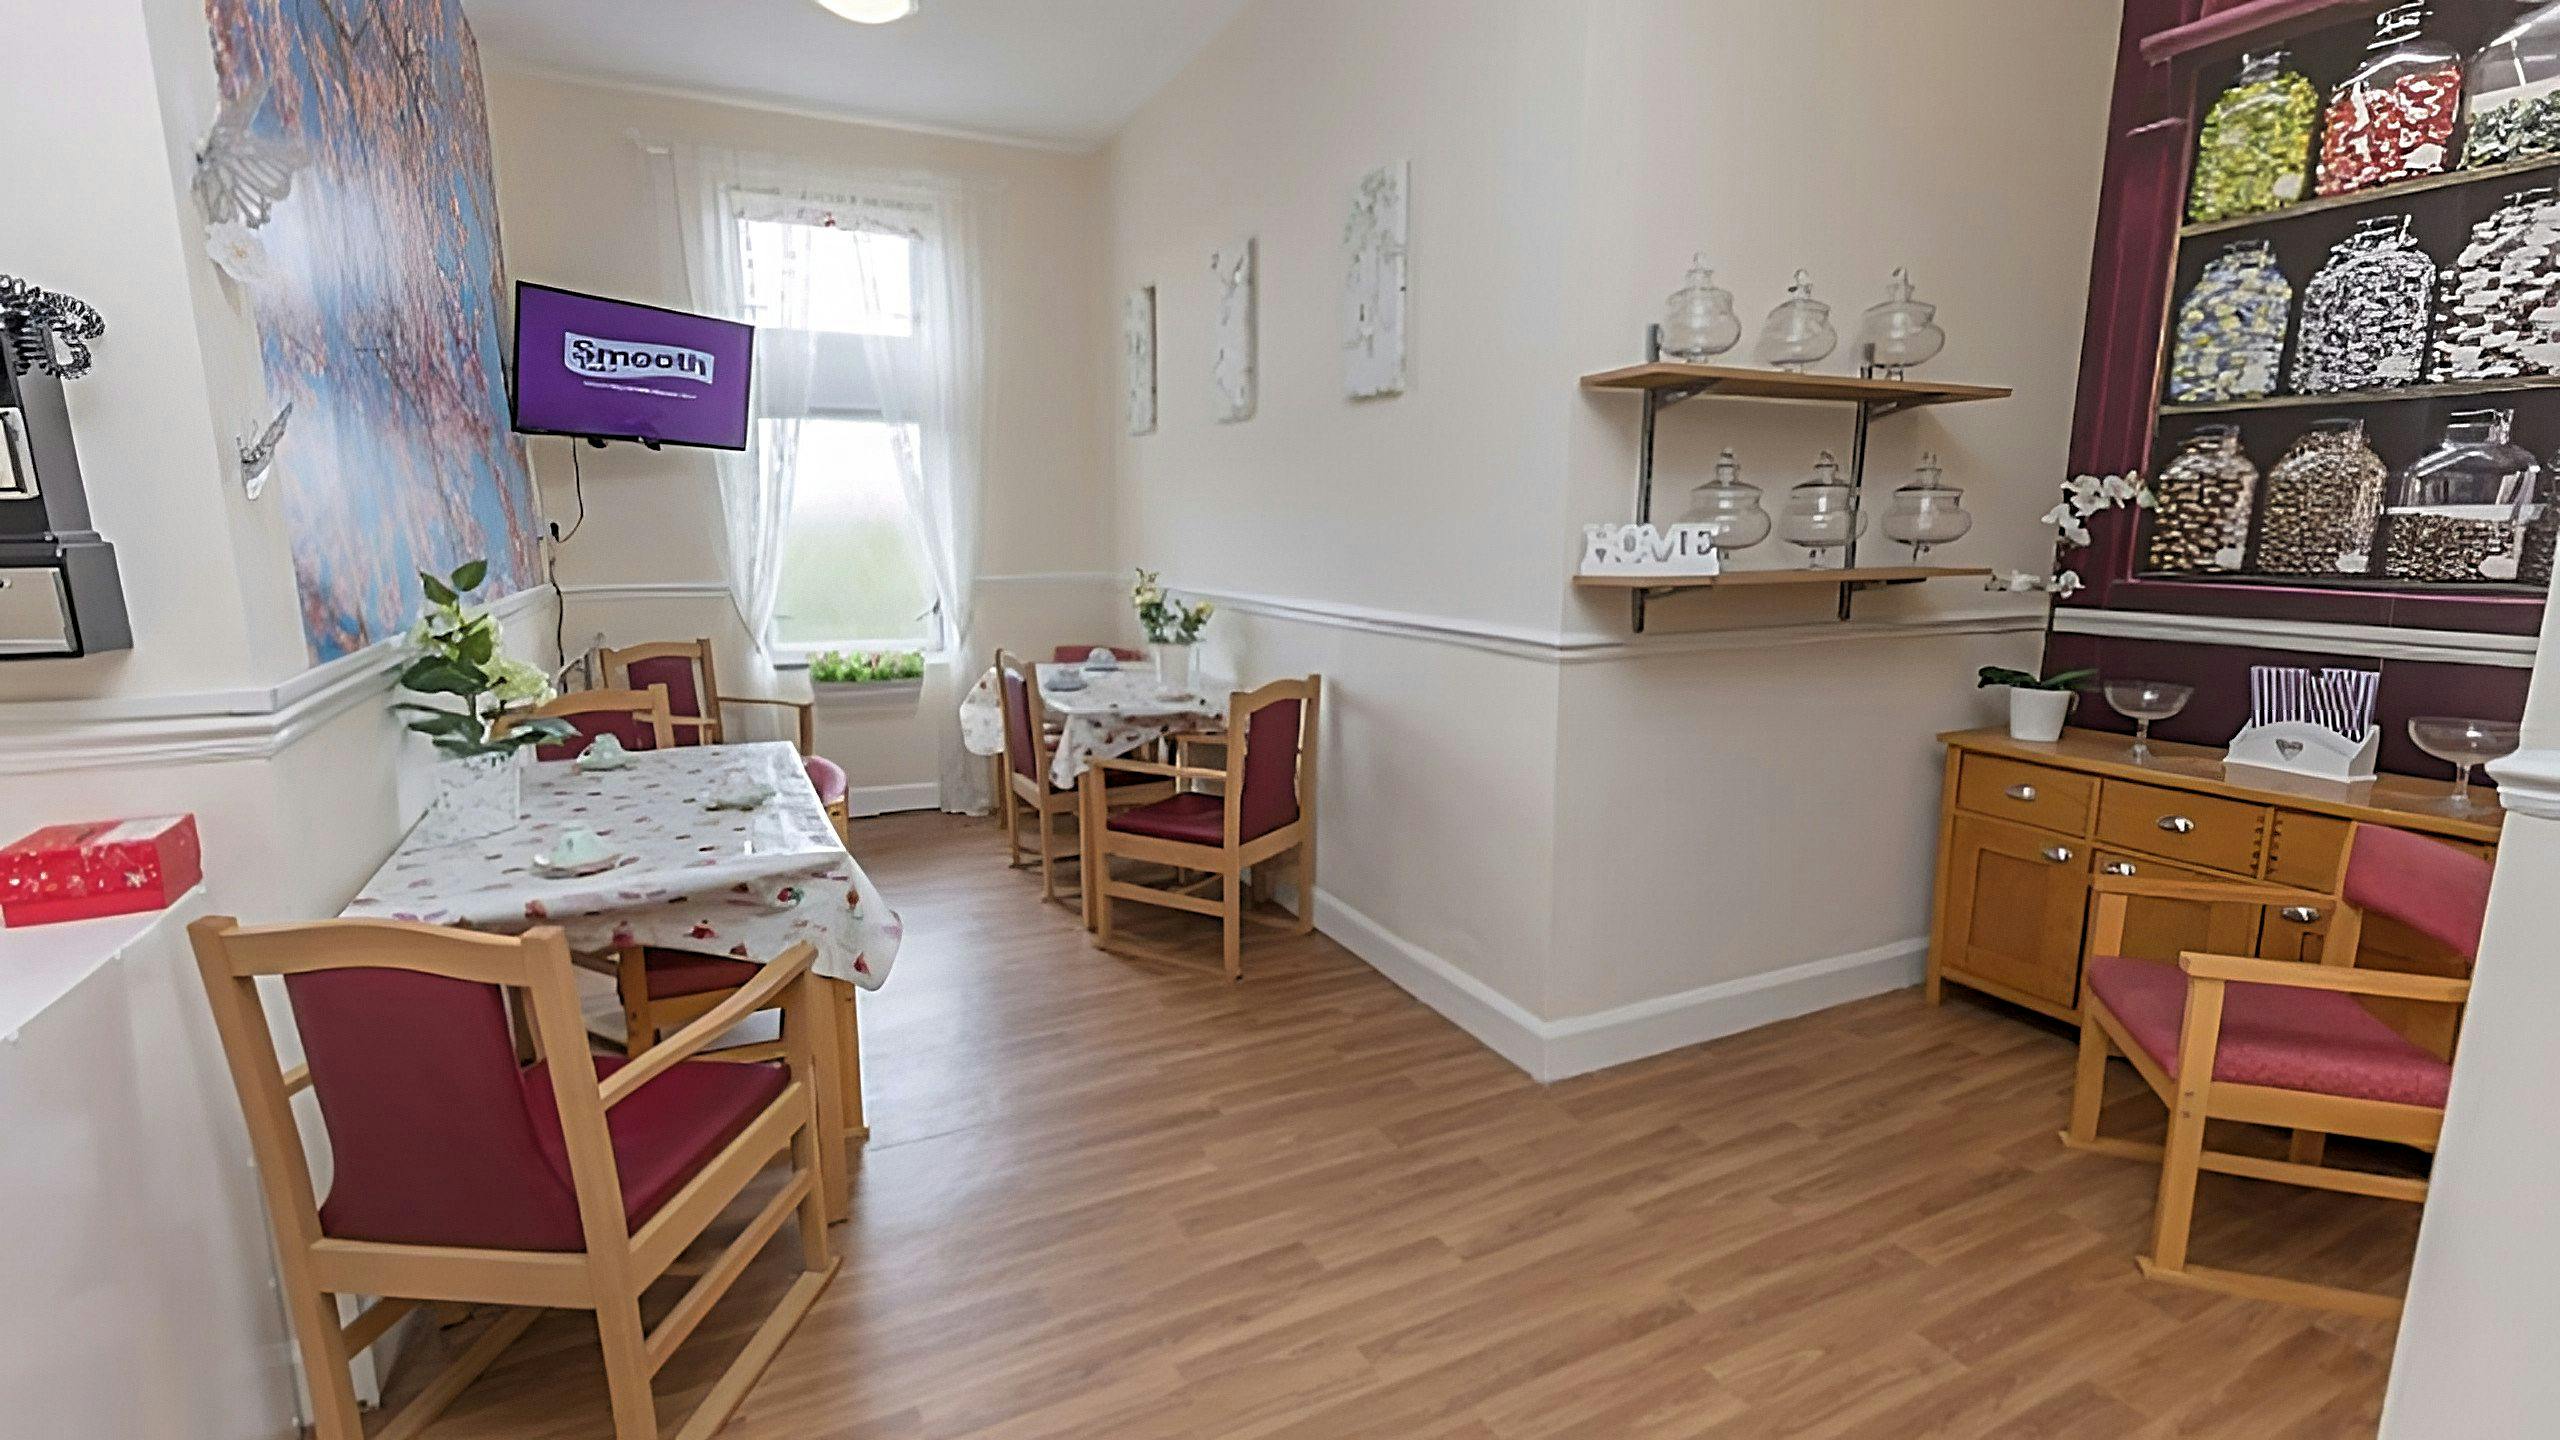 Countrywide - Thorntree Mews care home 8